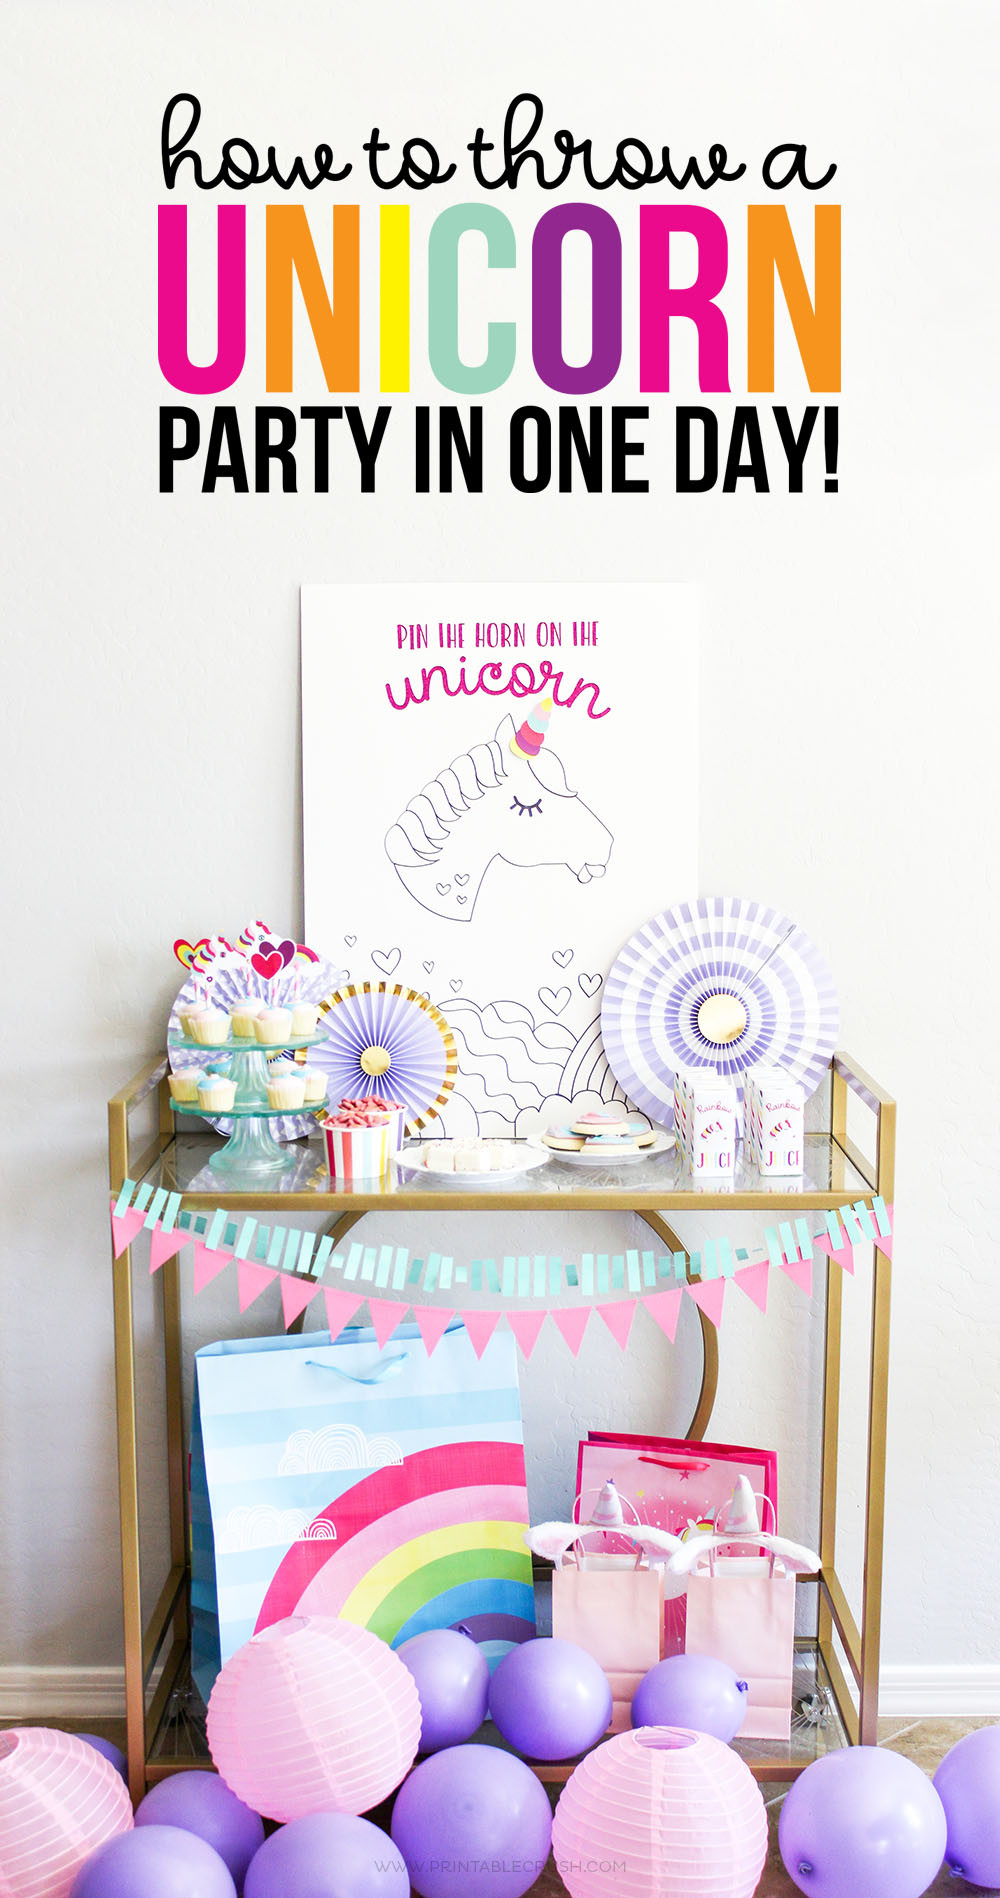 Unicorn Party Ideas On A Budget
 How to Throw a Bud Friendly Unicorn Party in e Day